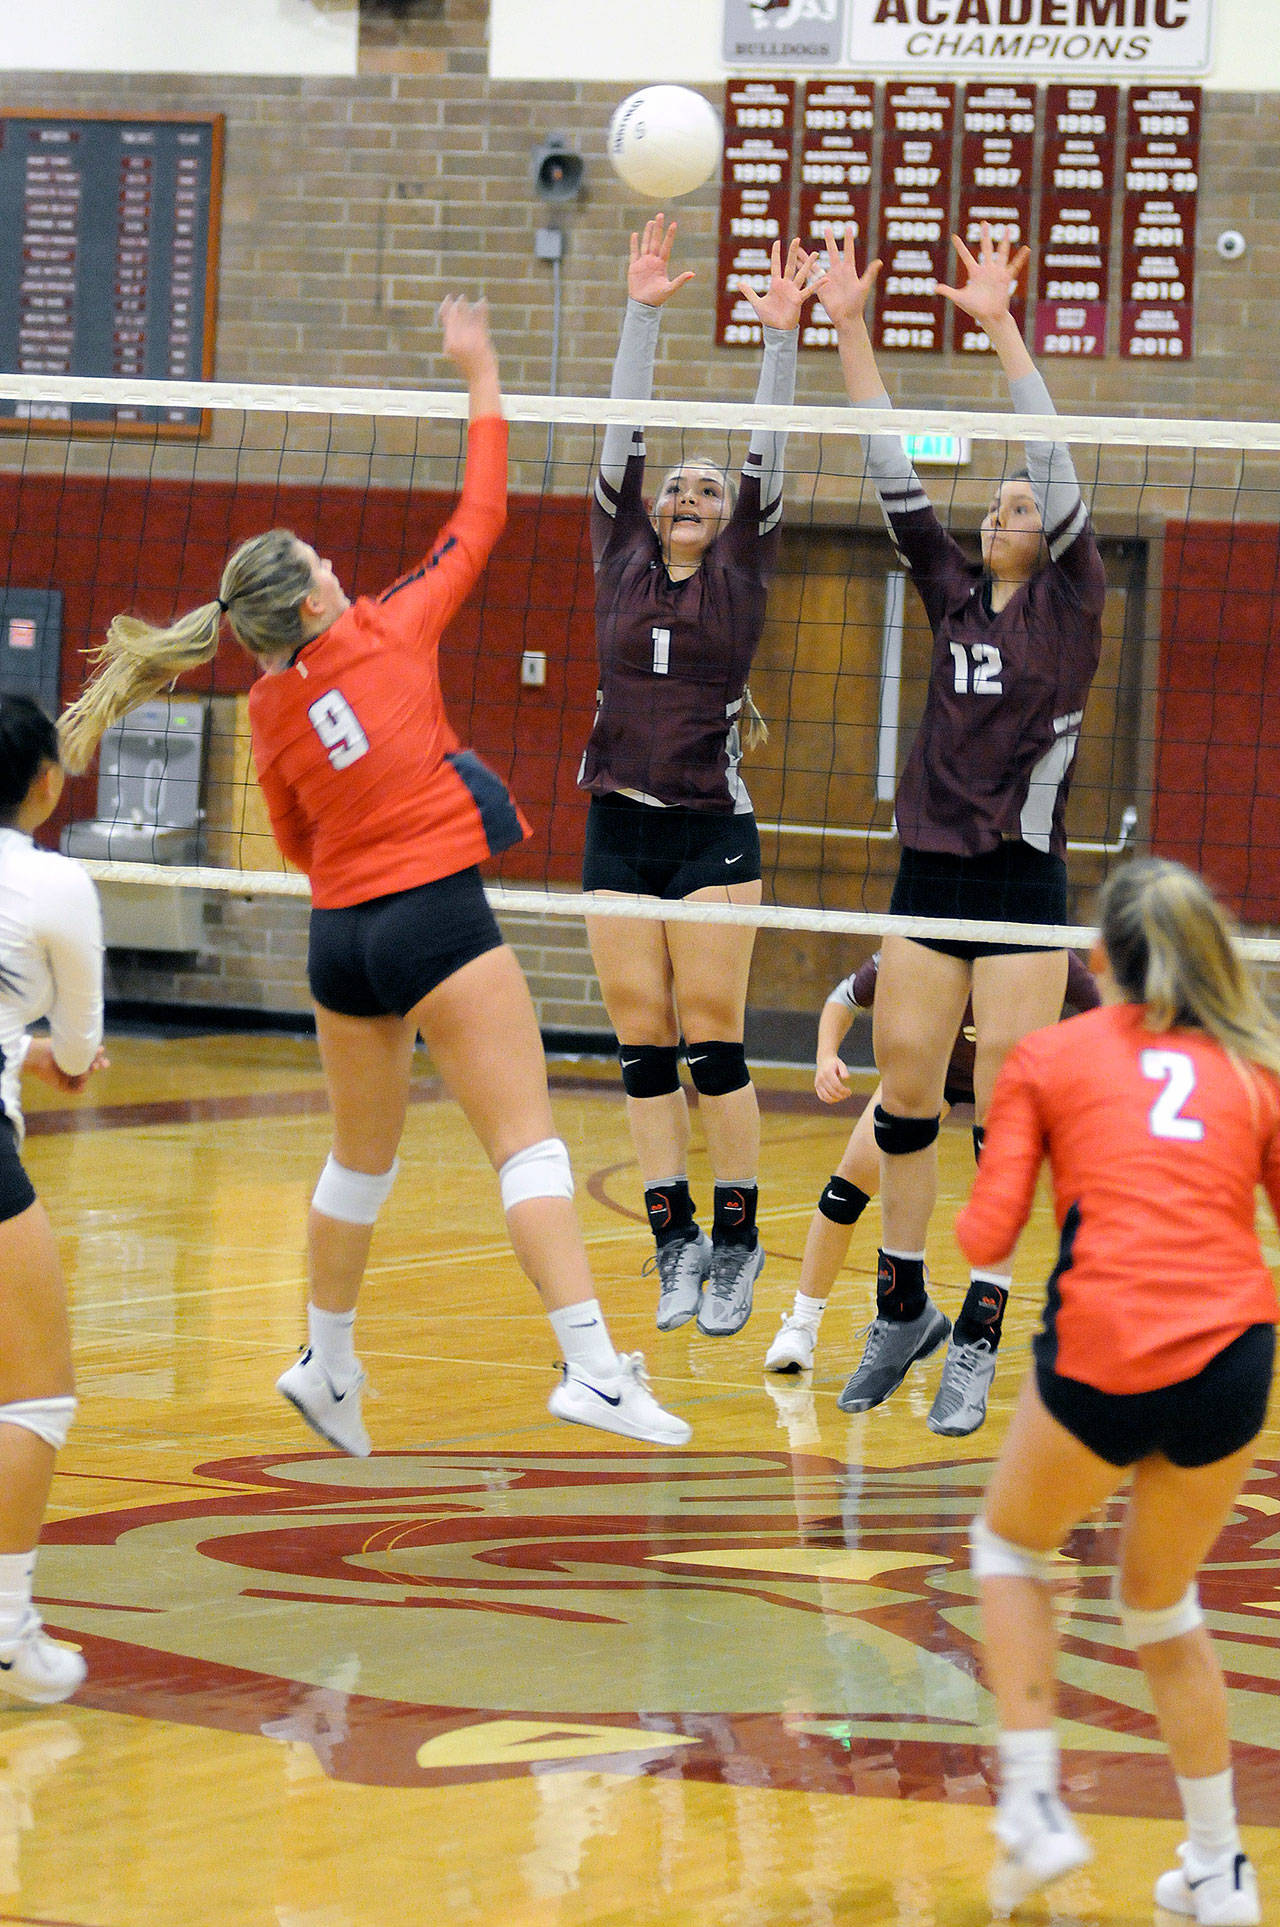 Montesano’s Janessa Otterstetter (1) and McKynnlie Dalan (12) defend a drop shot from King’s Way Christian’s Abby Cummins (9) during a match on Monday at Montesano High School. (Ryan Sparks | Grays Harbor News Group)